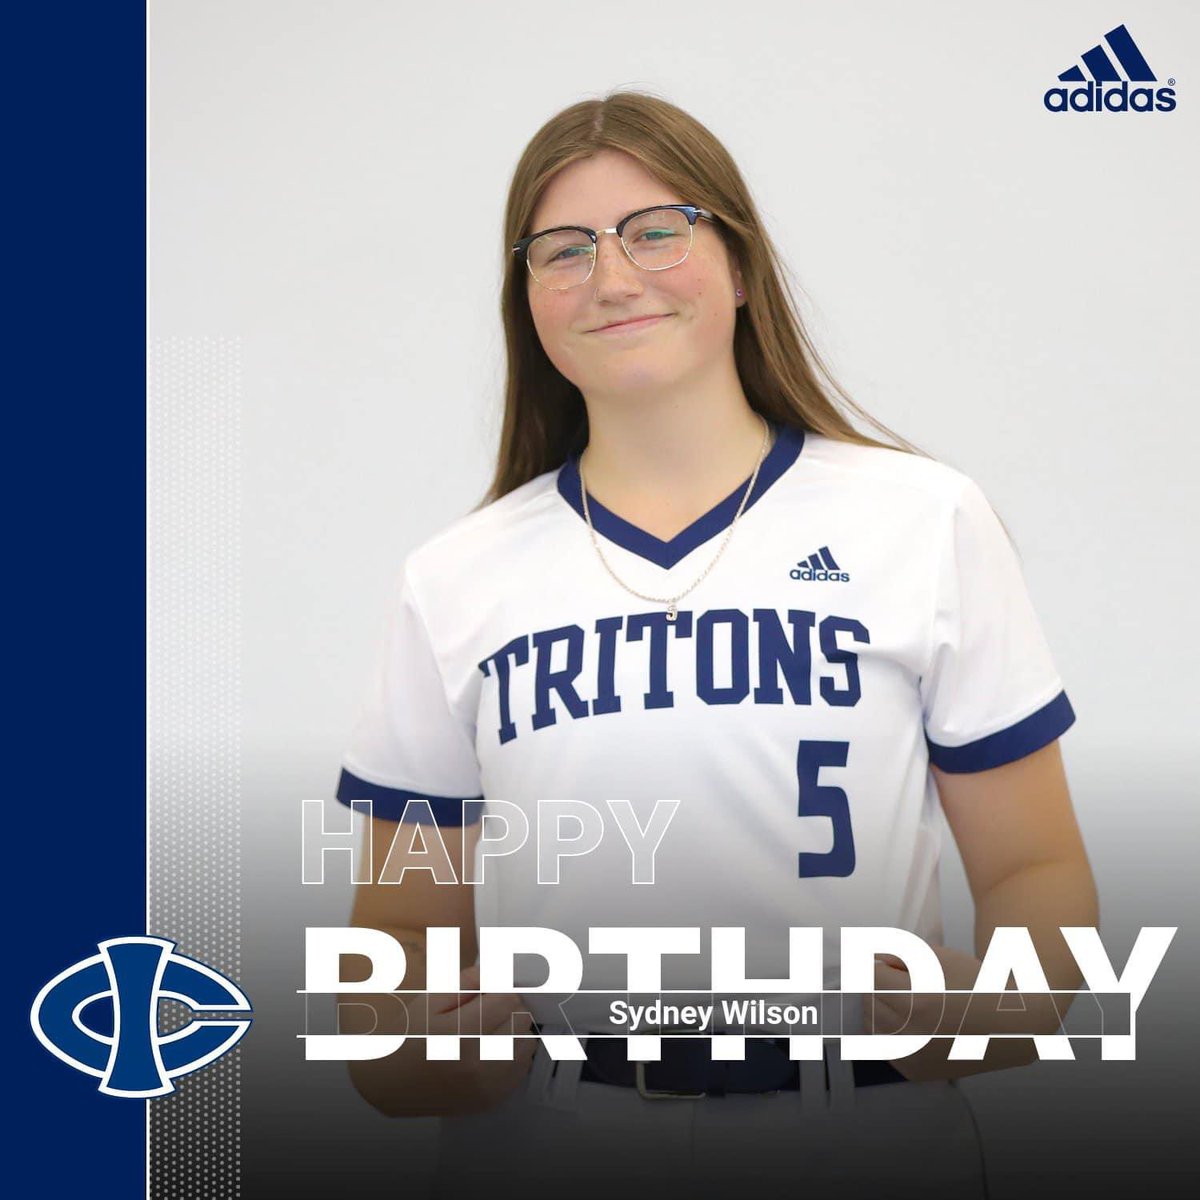 Triton Nation, please join us in wishing 𝑺𝒚𝒅𝒏𝒆𝒚 𝑾𝒊𝒍𝒔𝒐𝒏 a very Happy Birthday! Have an amazing day Syd!🎉